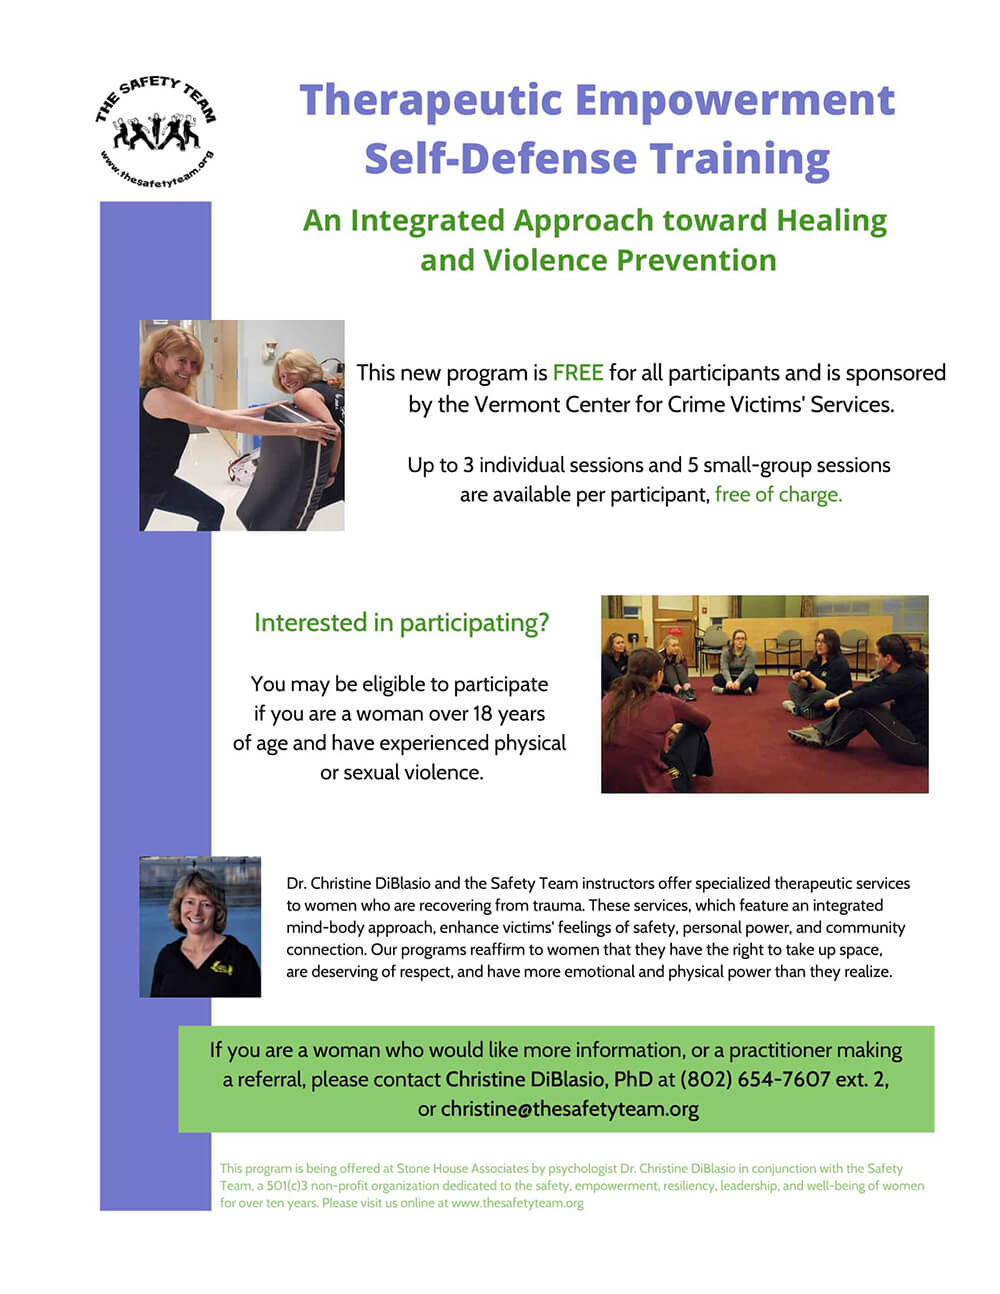 Integrated Trauma Recovery and Violence Prevention Program